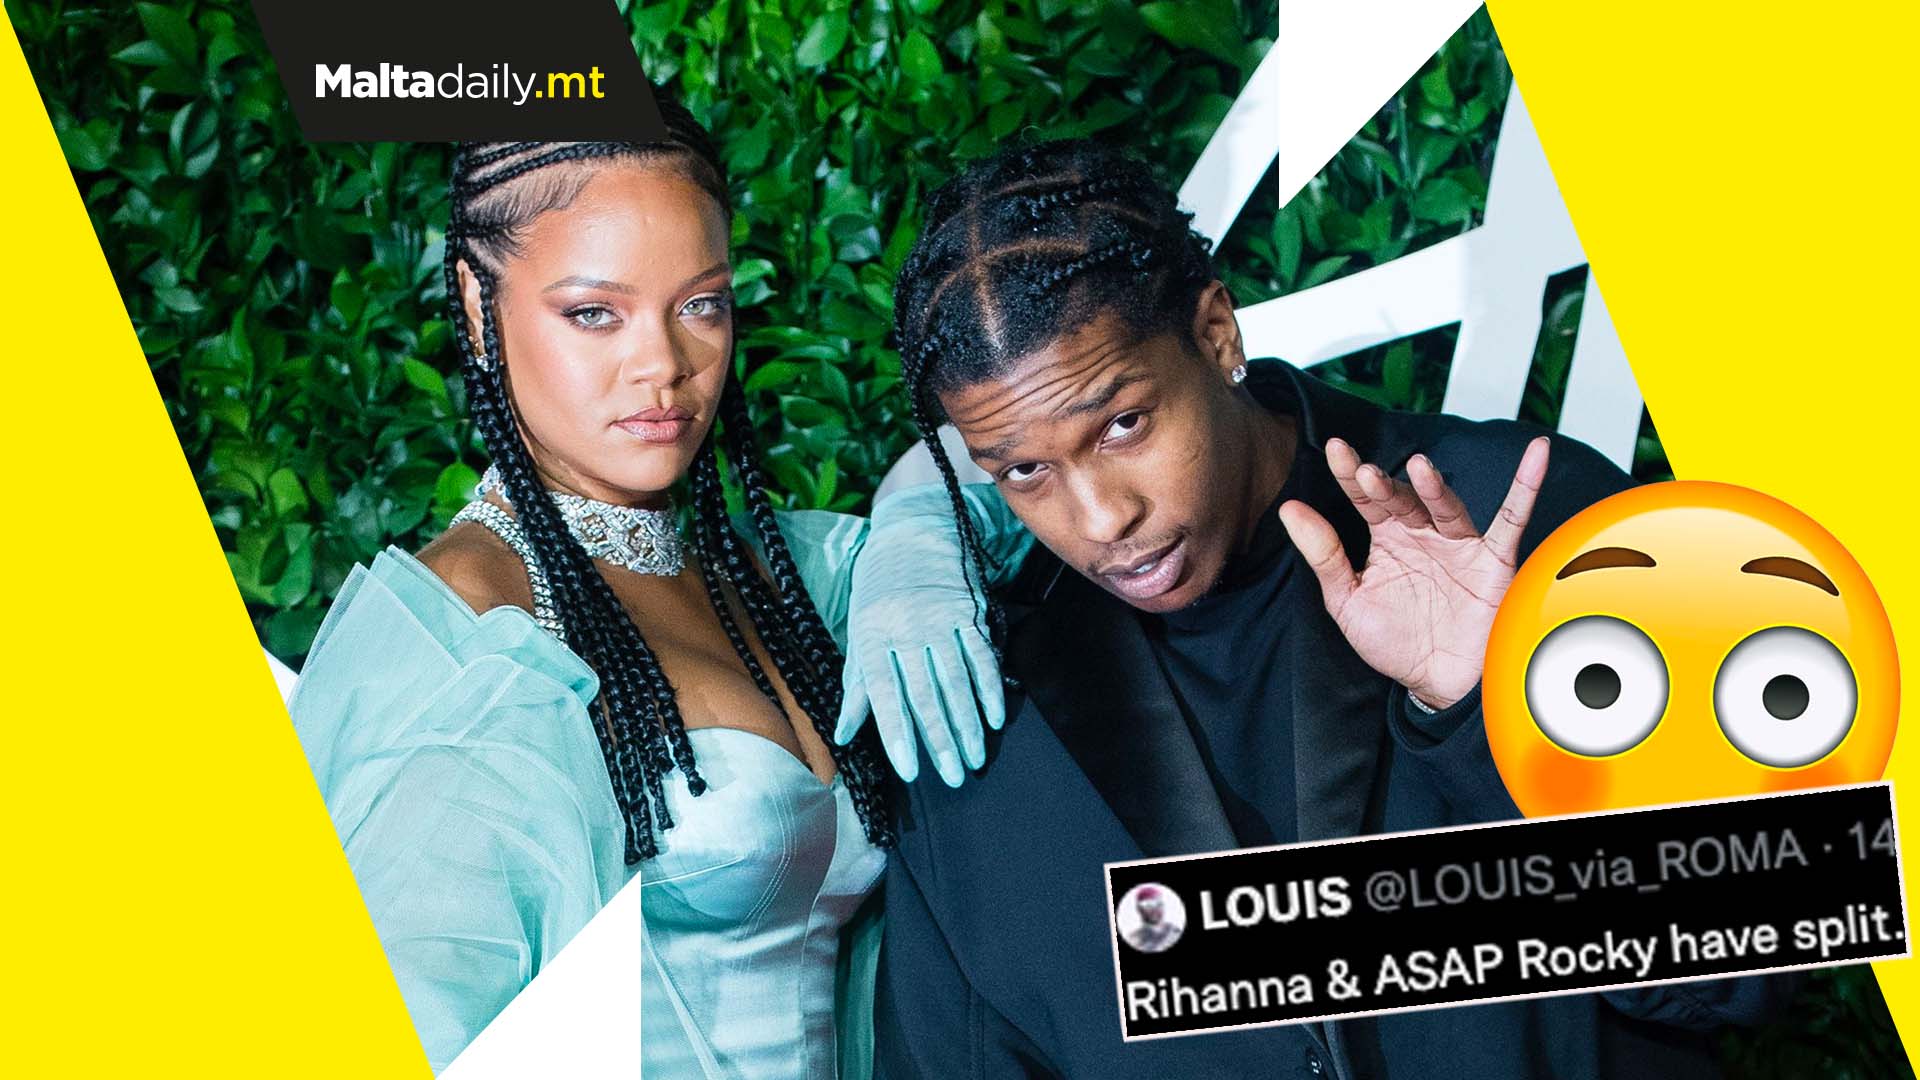 Viral tweet suggests ASAP Rocky cheated on Rihanna prompting break-up